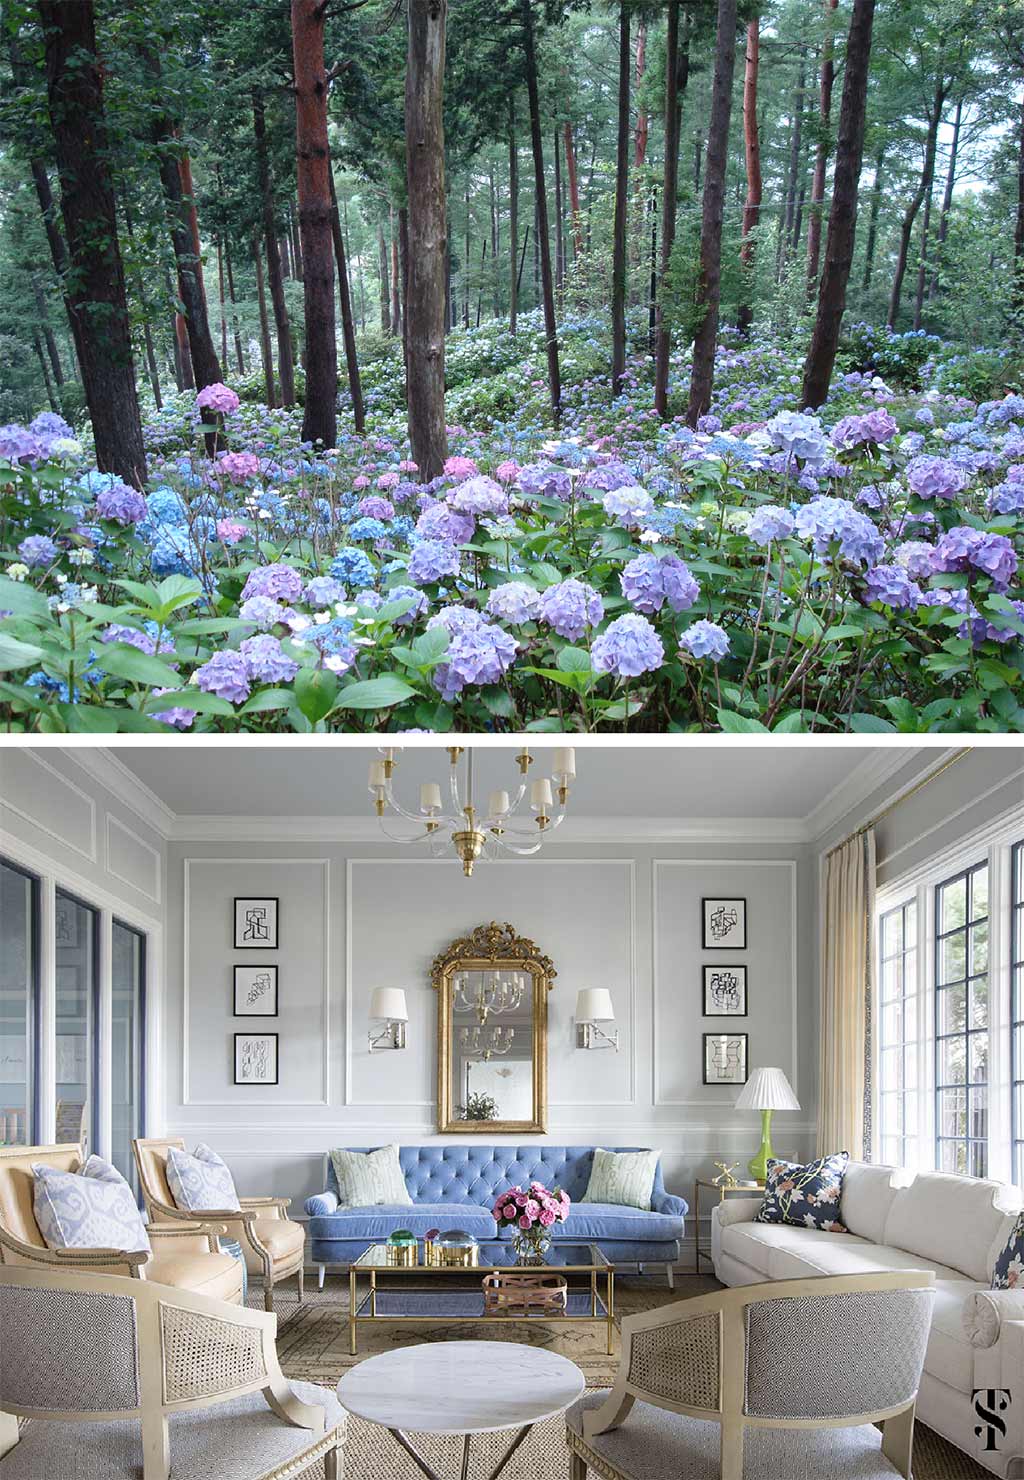 Hydrangeas, forest, Japan. Color in nature. Chic dental office by Summer Thornton Design